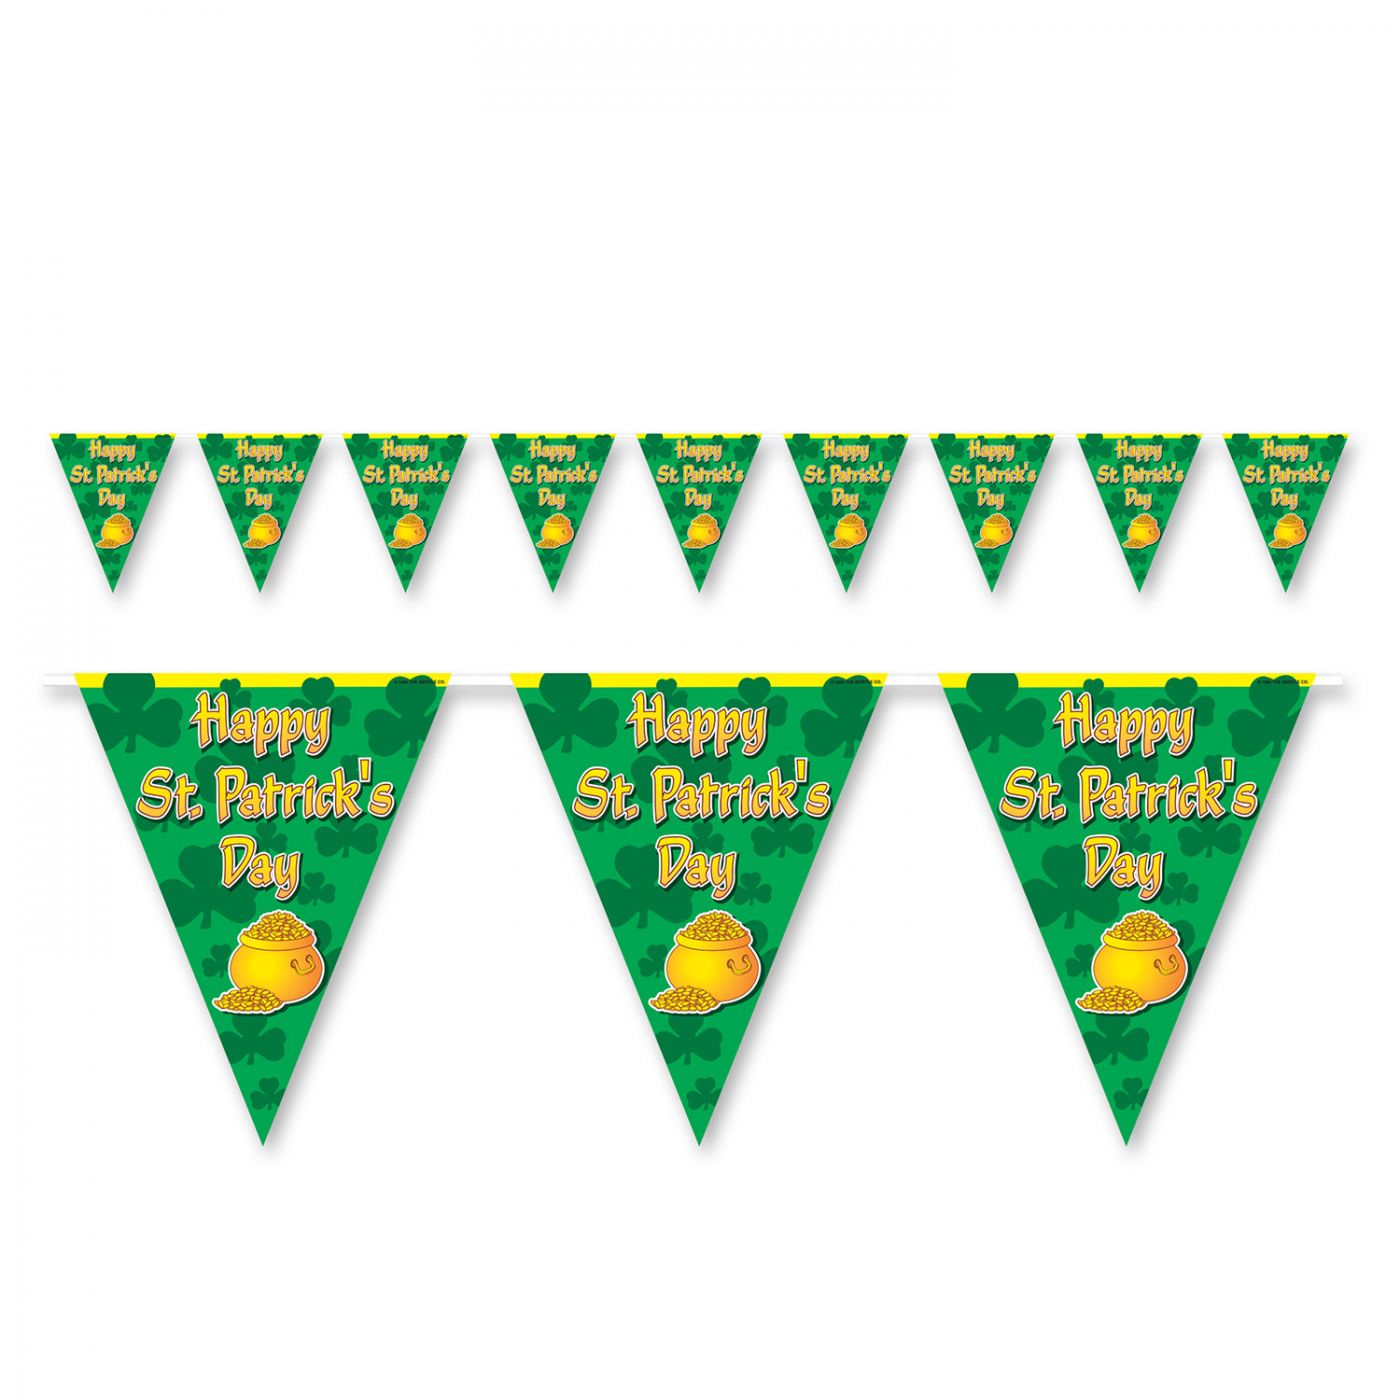 Happy St Patrick's Day Pennant Banner (12) image